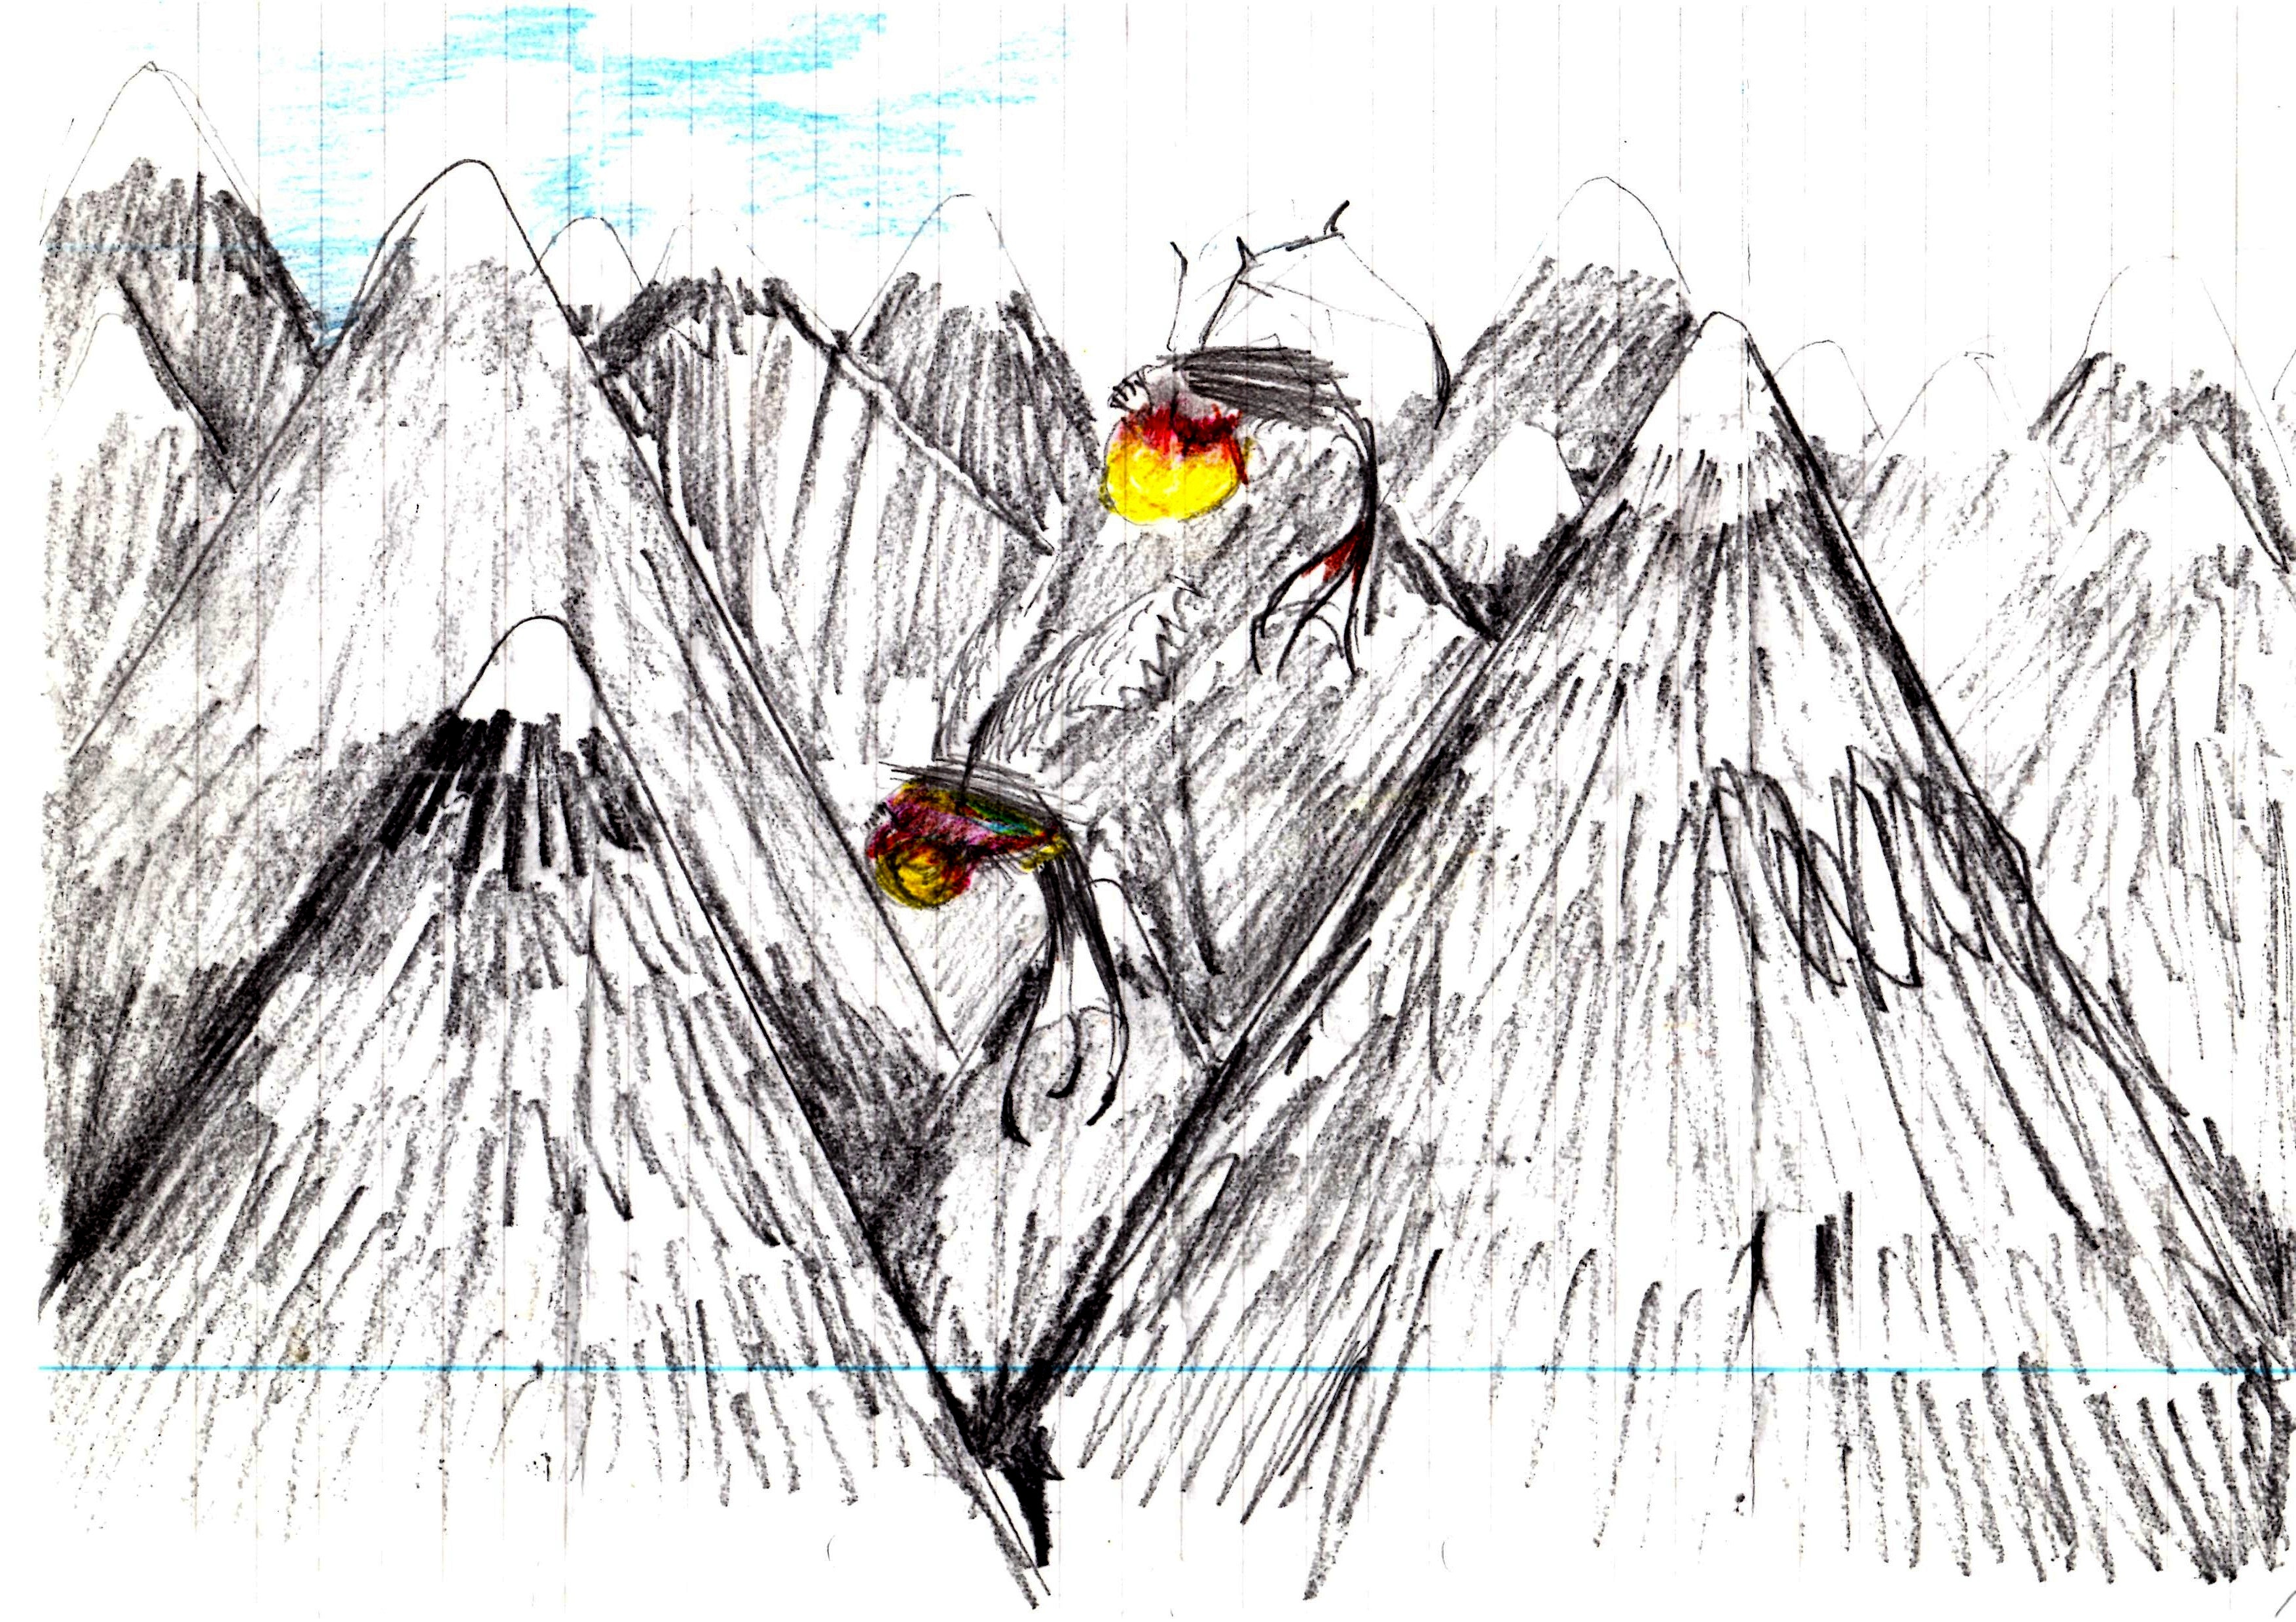 Pattergo in the Mountains Sketch